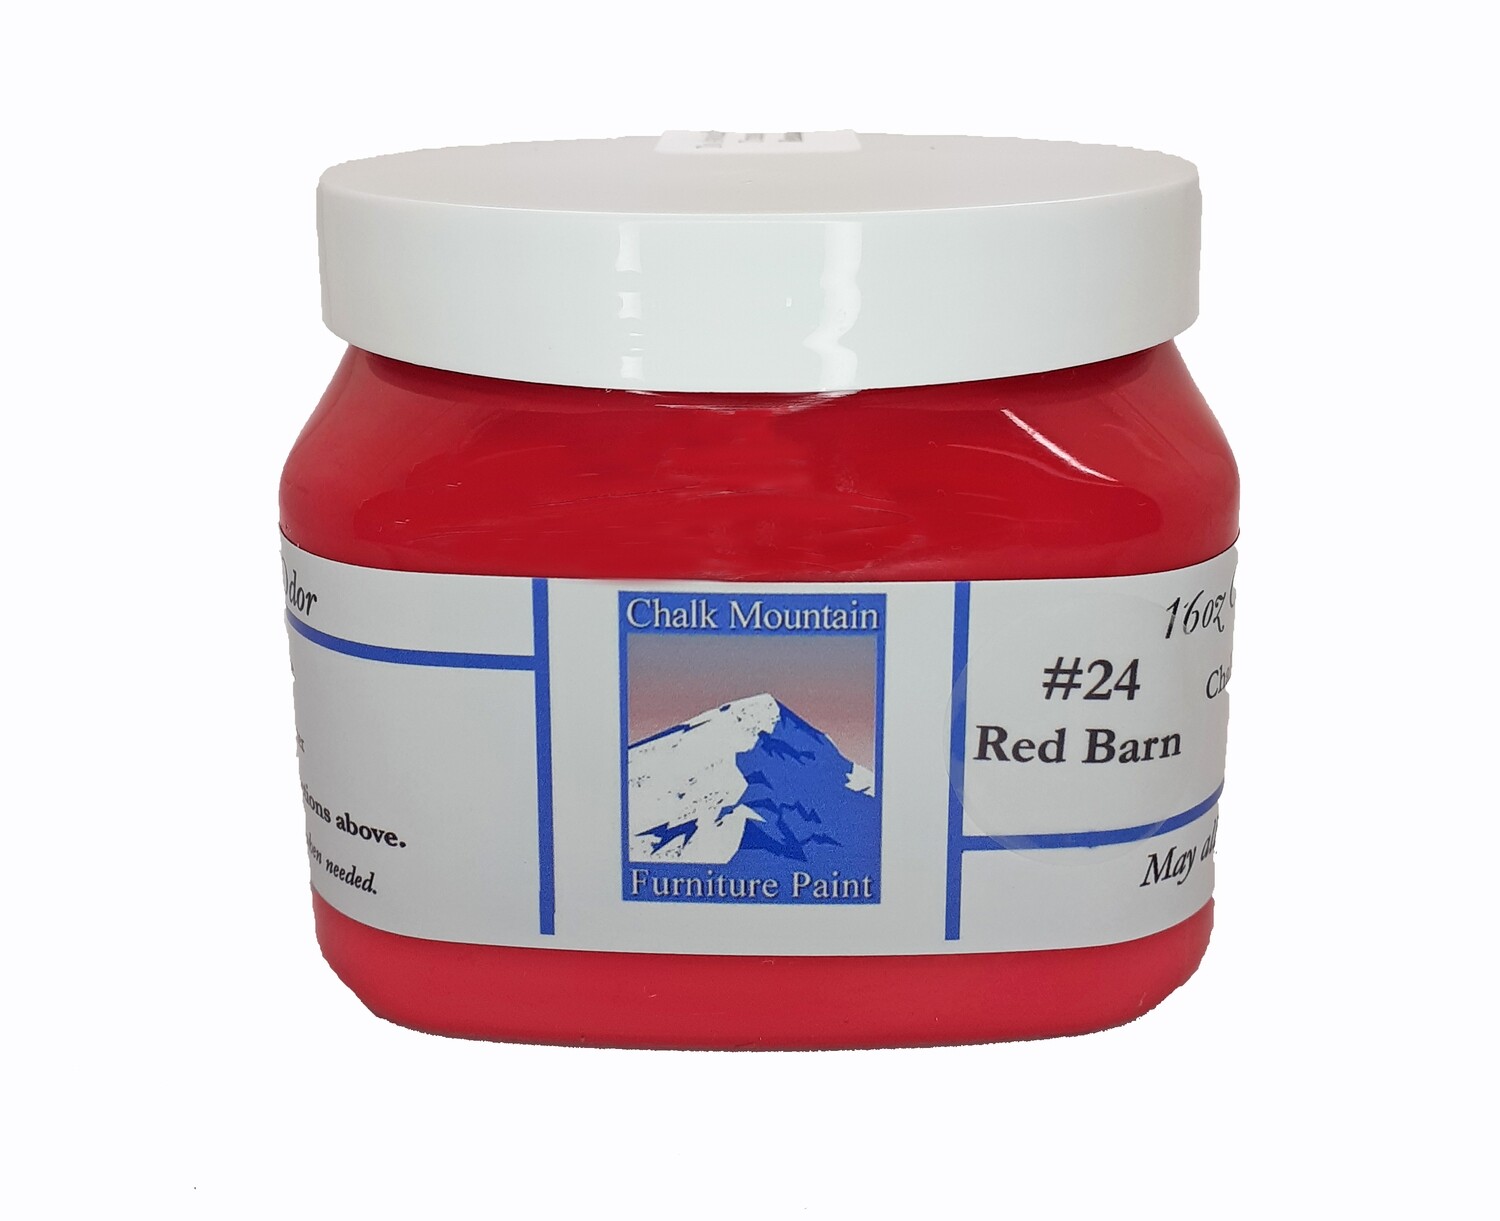 Chalk Mountain Paint #24 - Red Barn